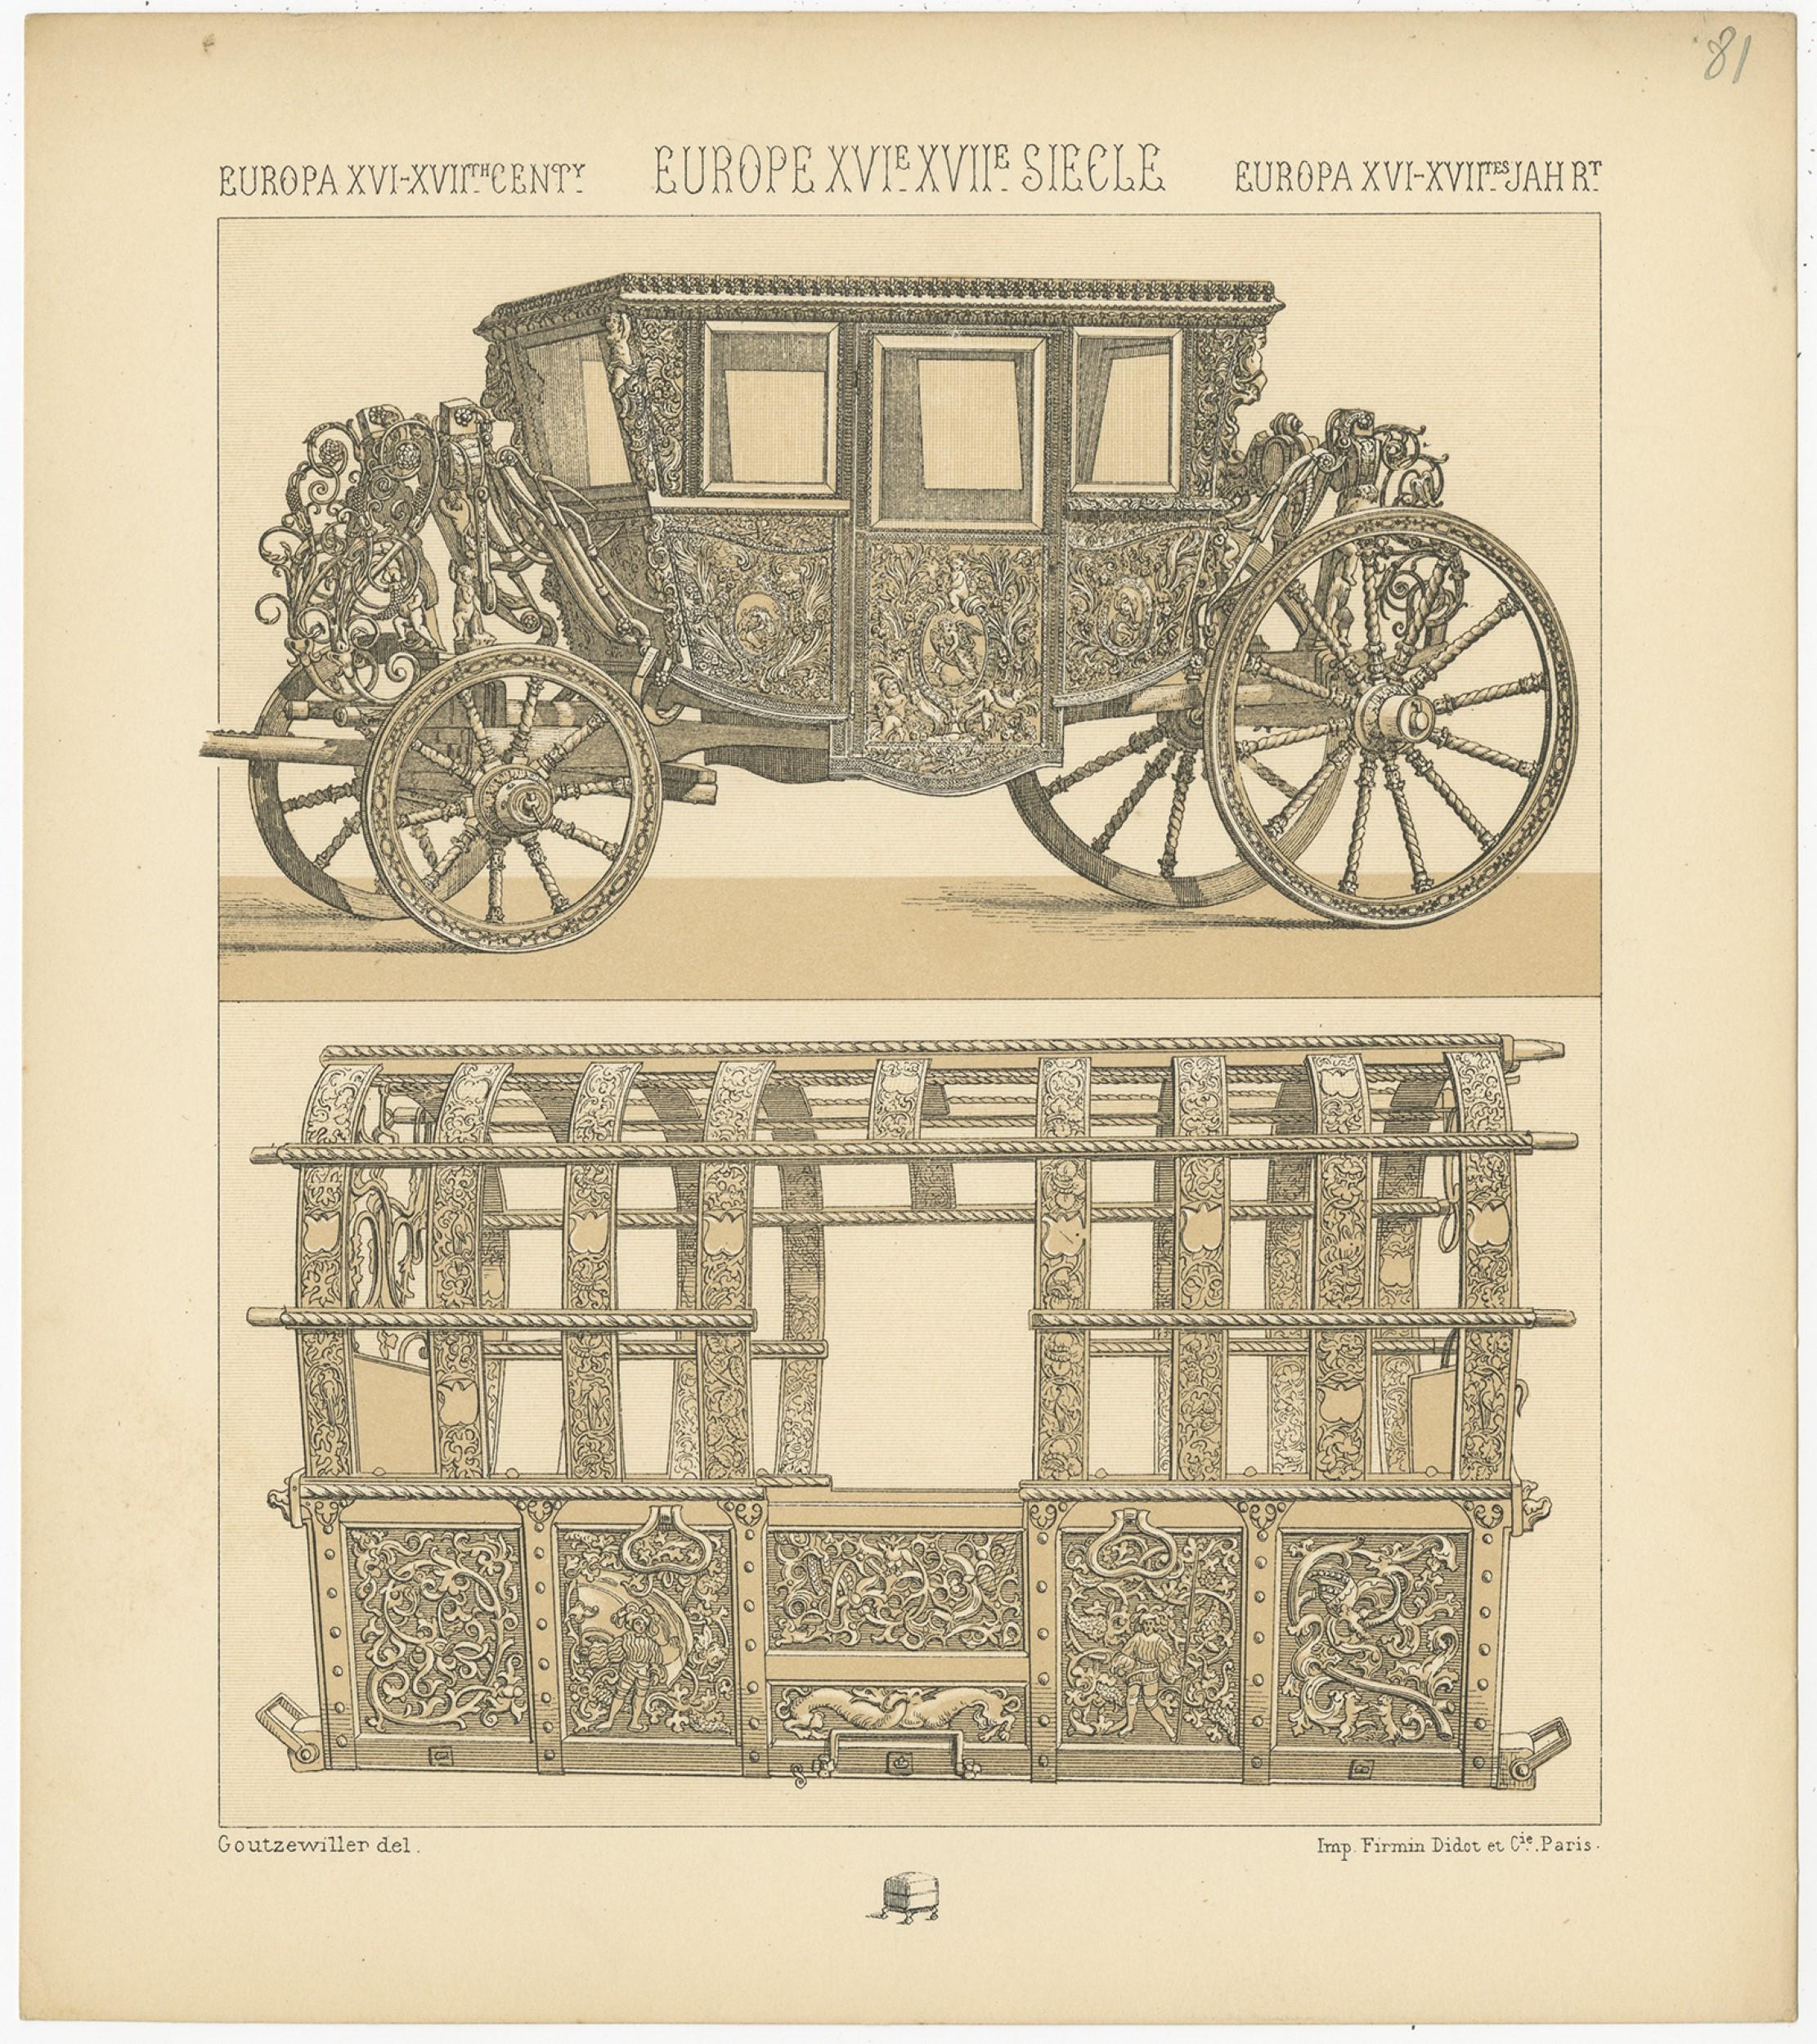 16th century carriage